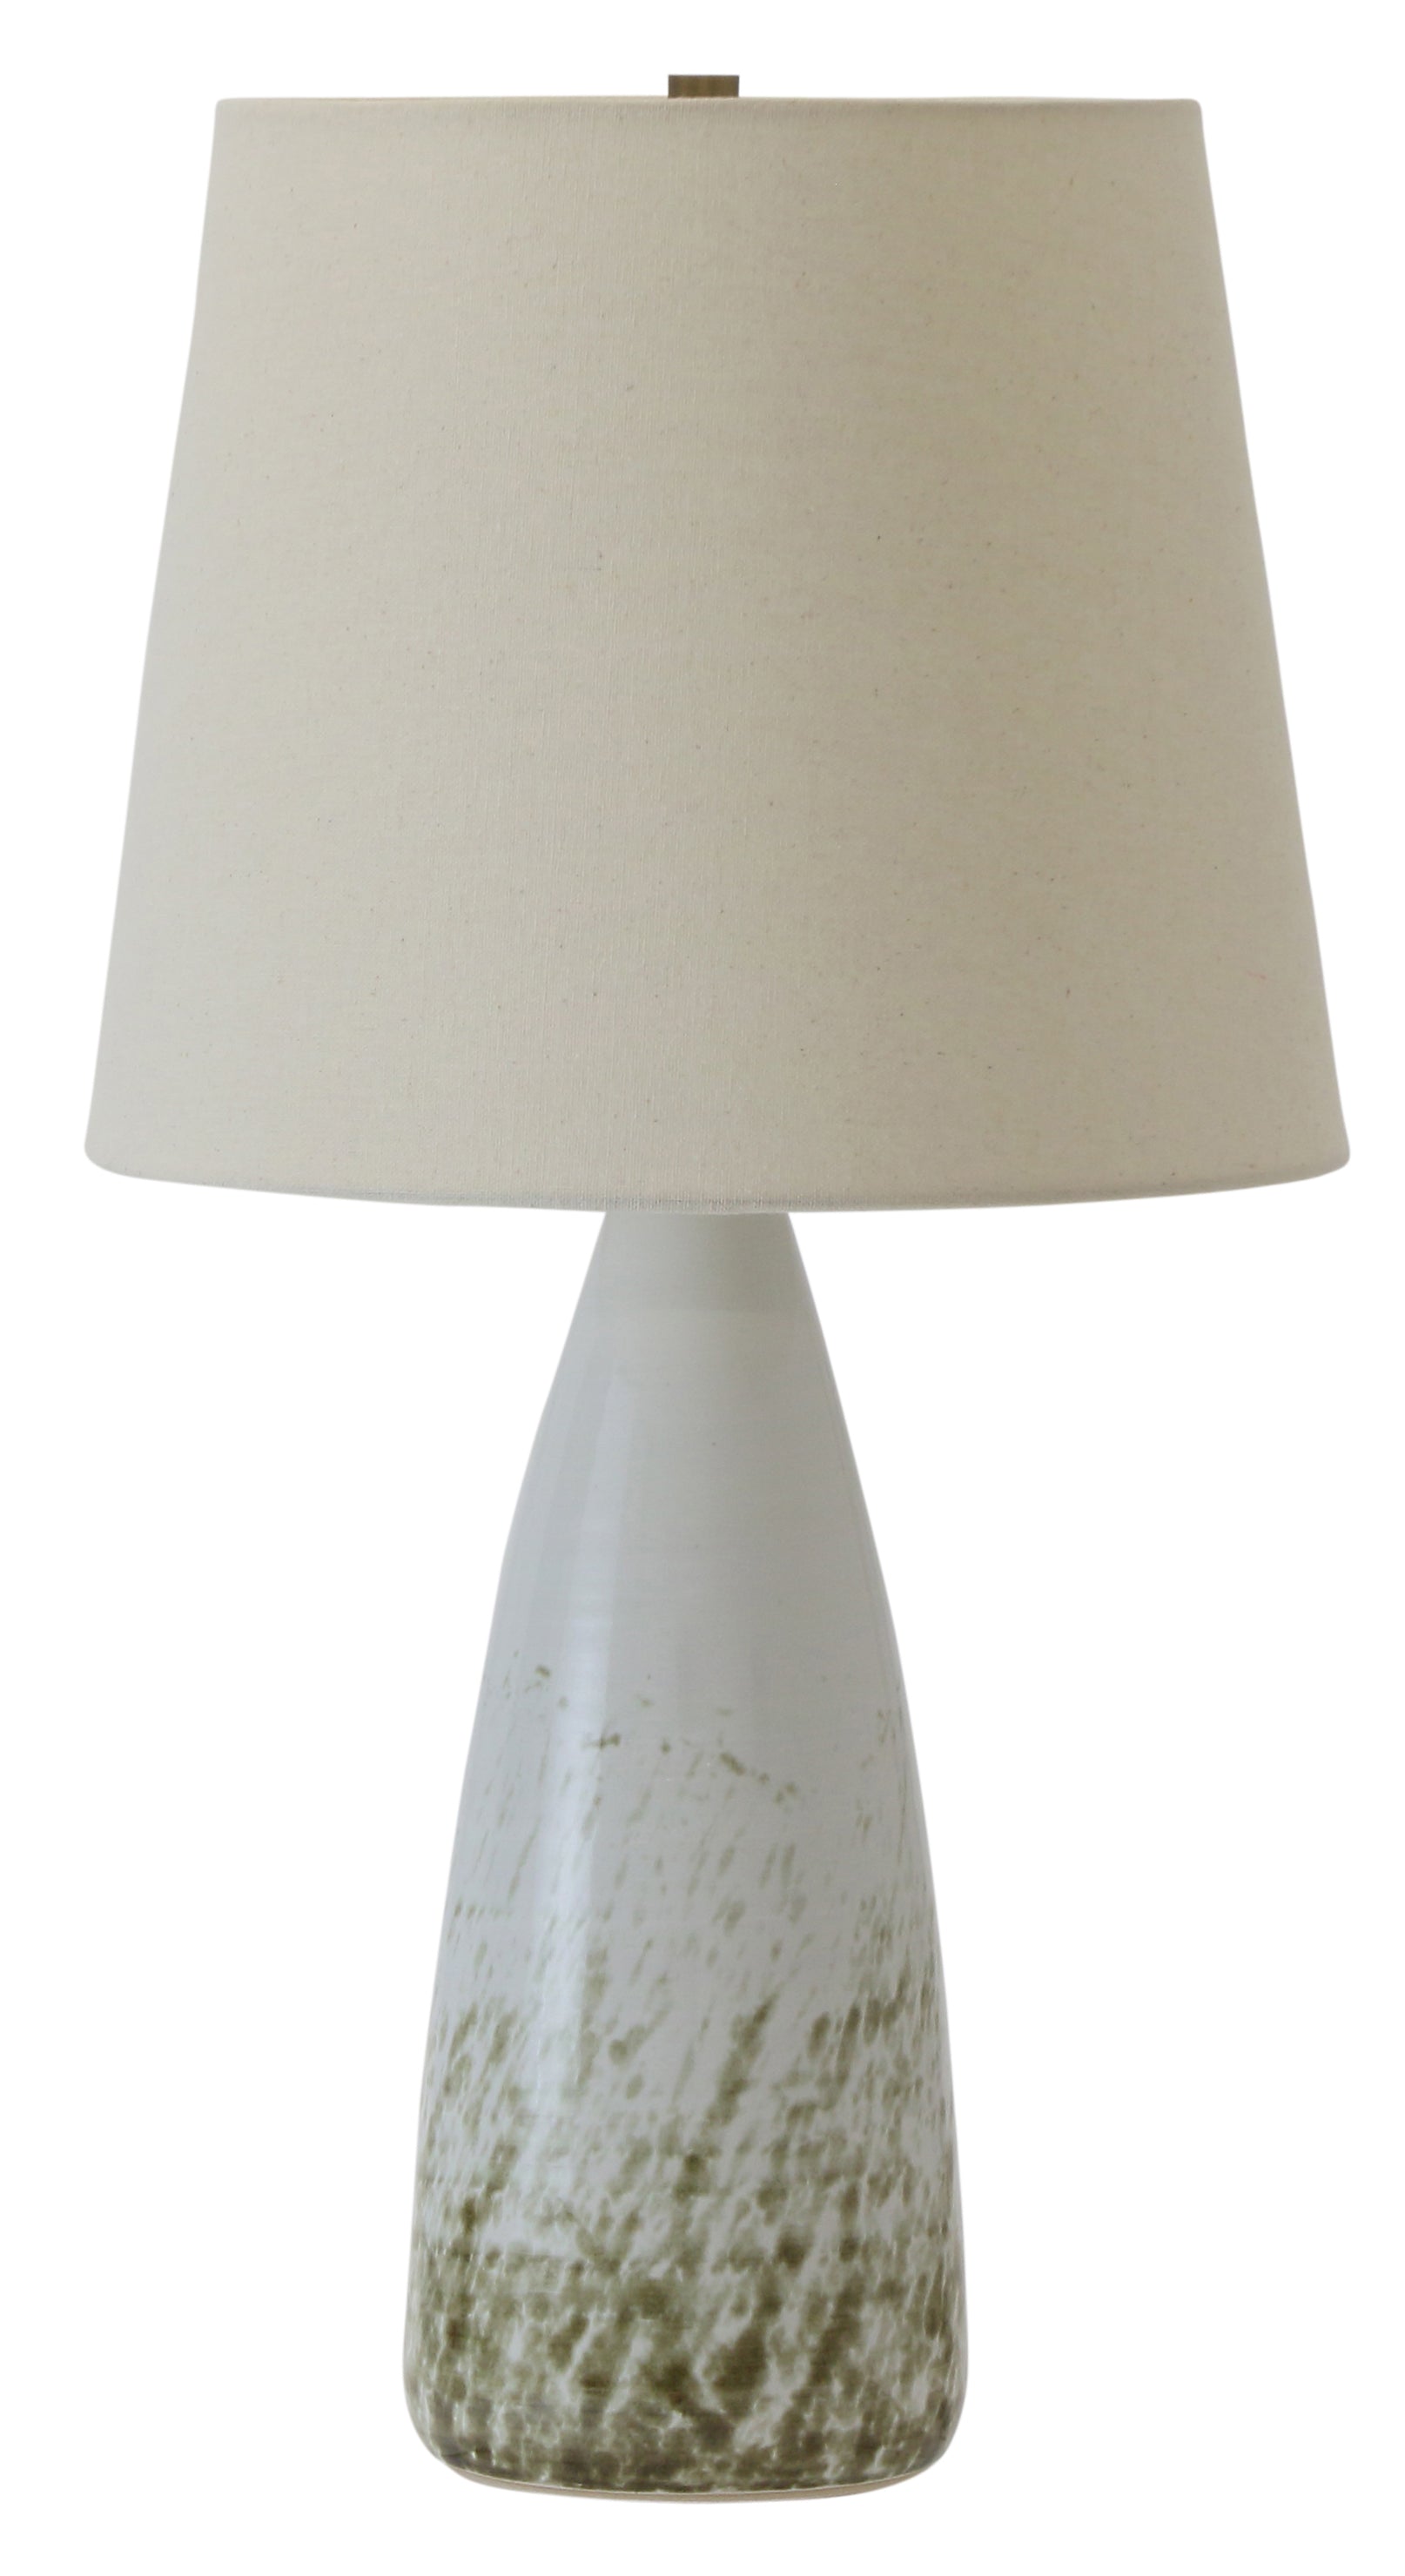 House of Troy Scatchard 25.5" Stoneware Table Lamp in Decorated White Gloss GS850-DWG